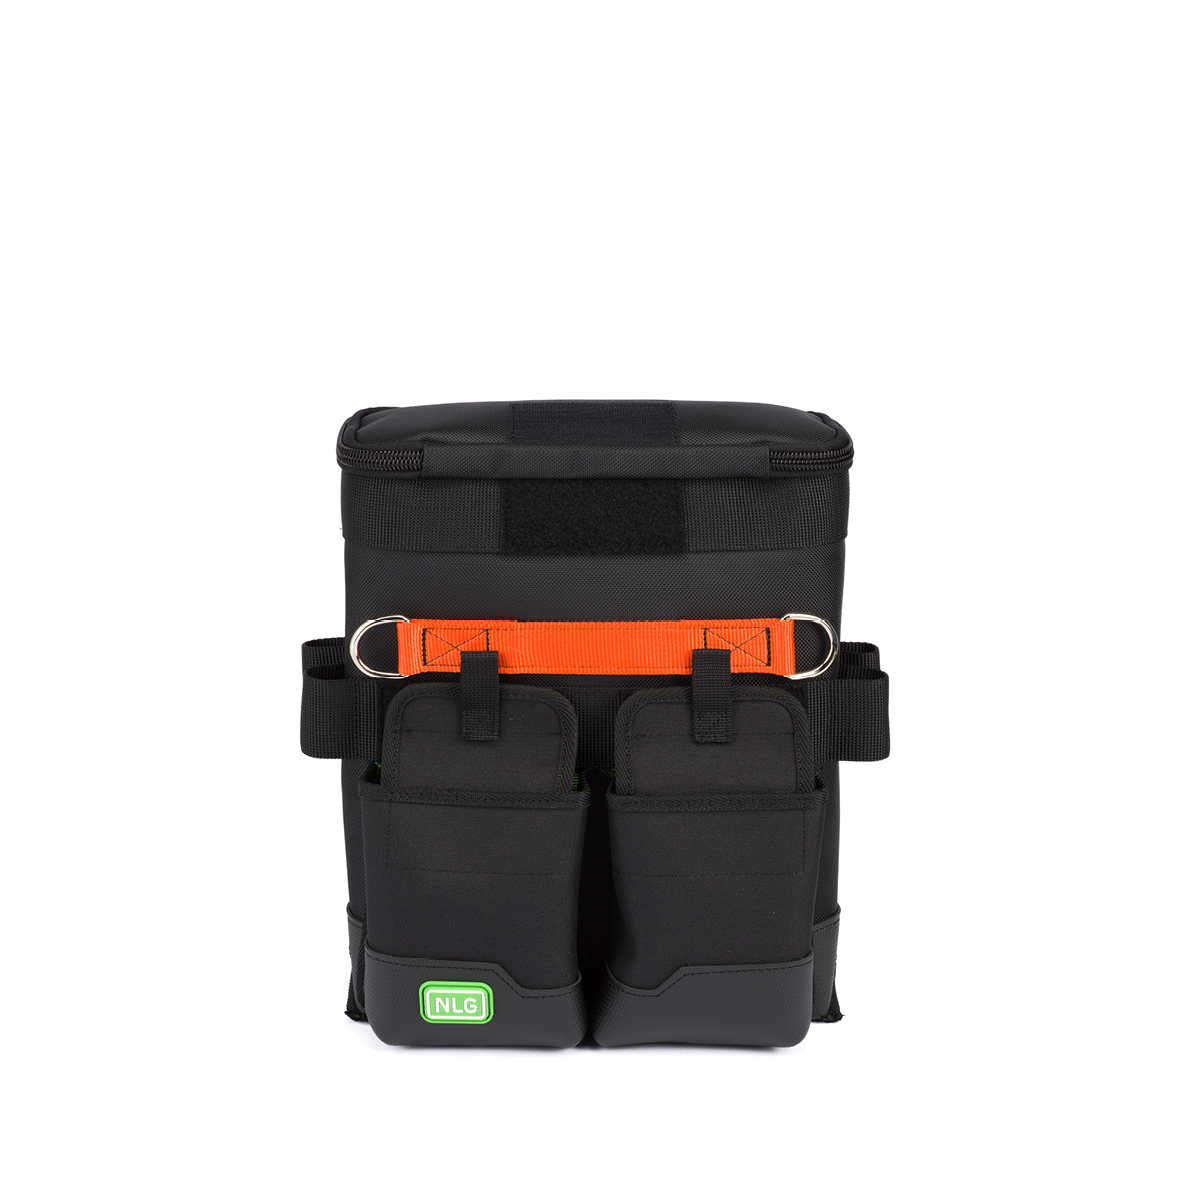 NLG Linesman Bag from Columbia Safety